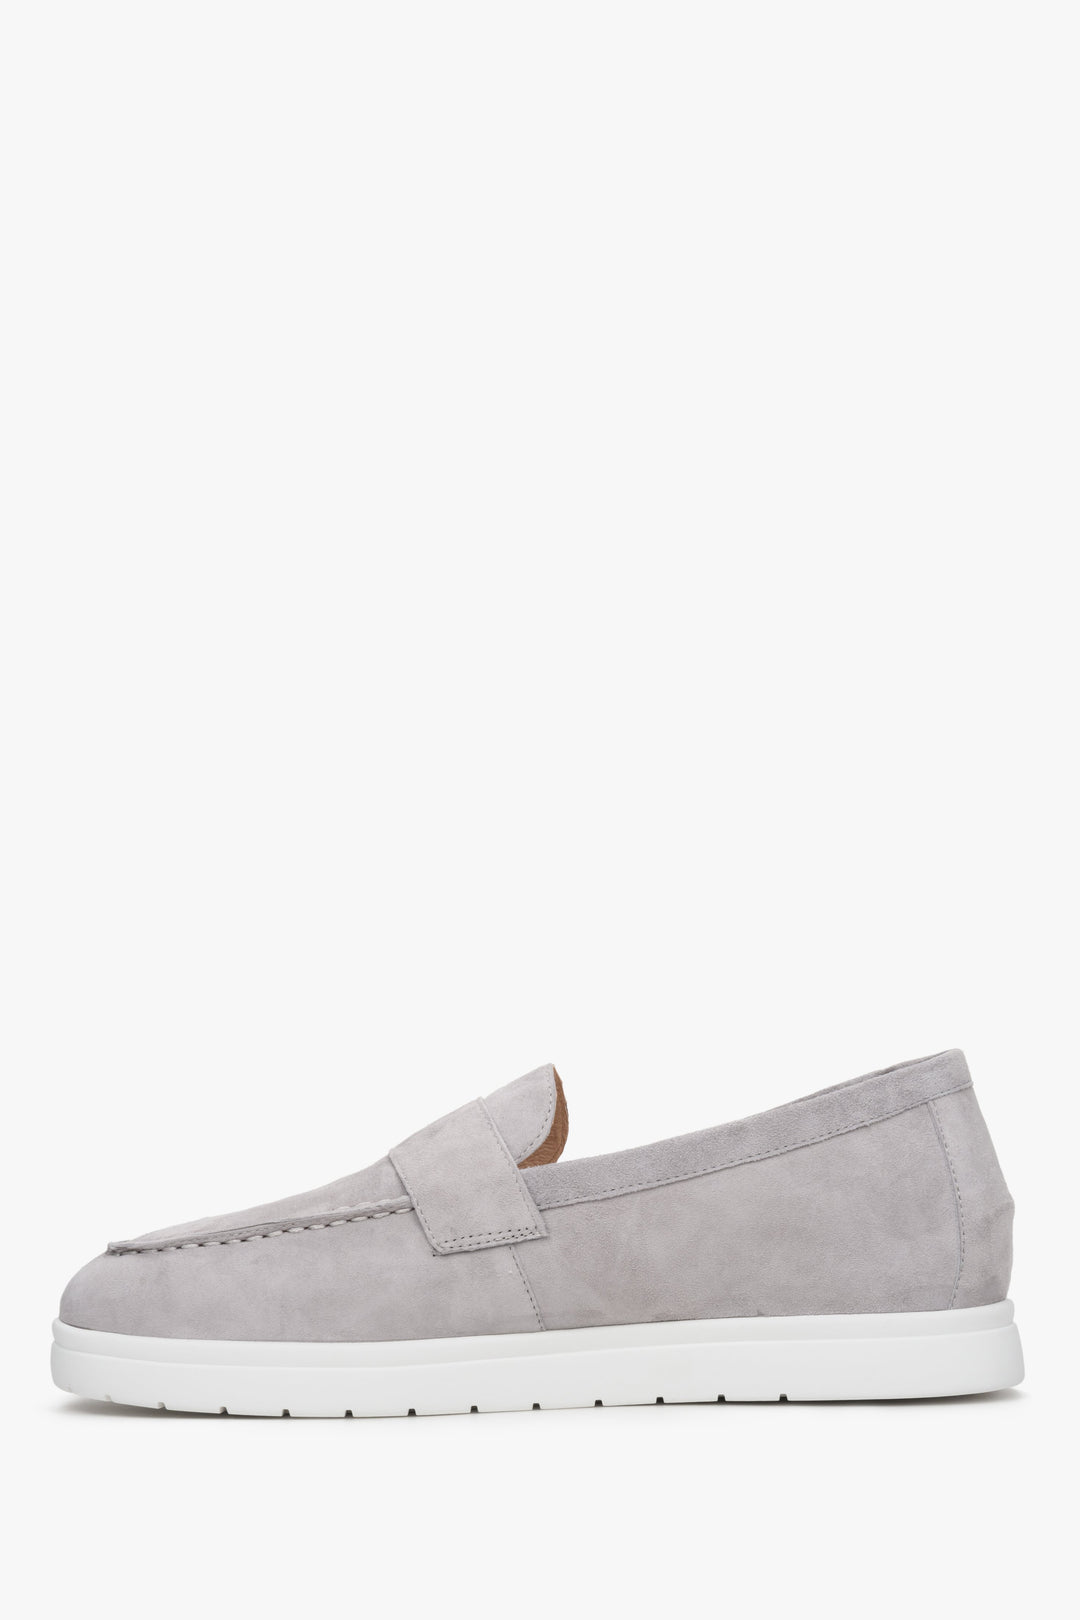 Grey Estro women's moccasins made of genuine velour for spring and fall - shoe profile.